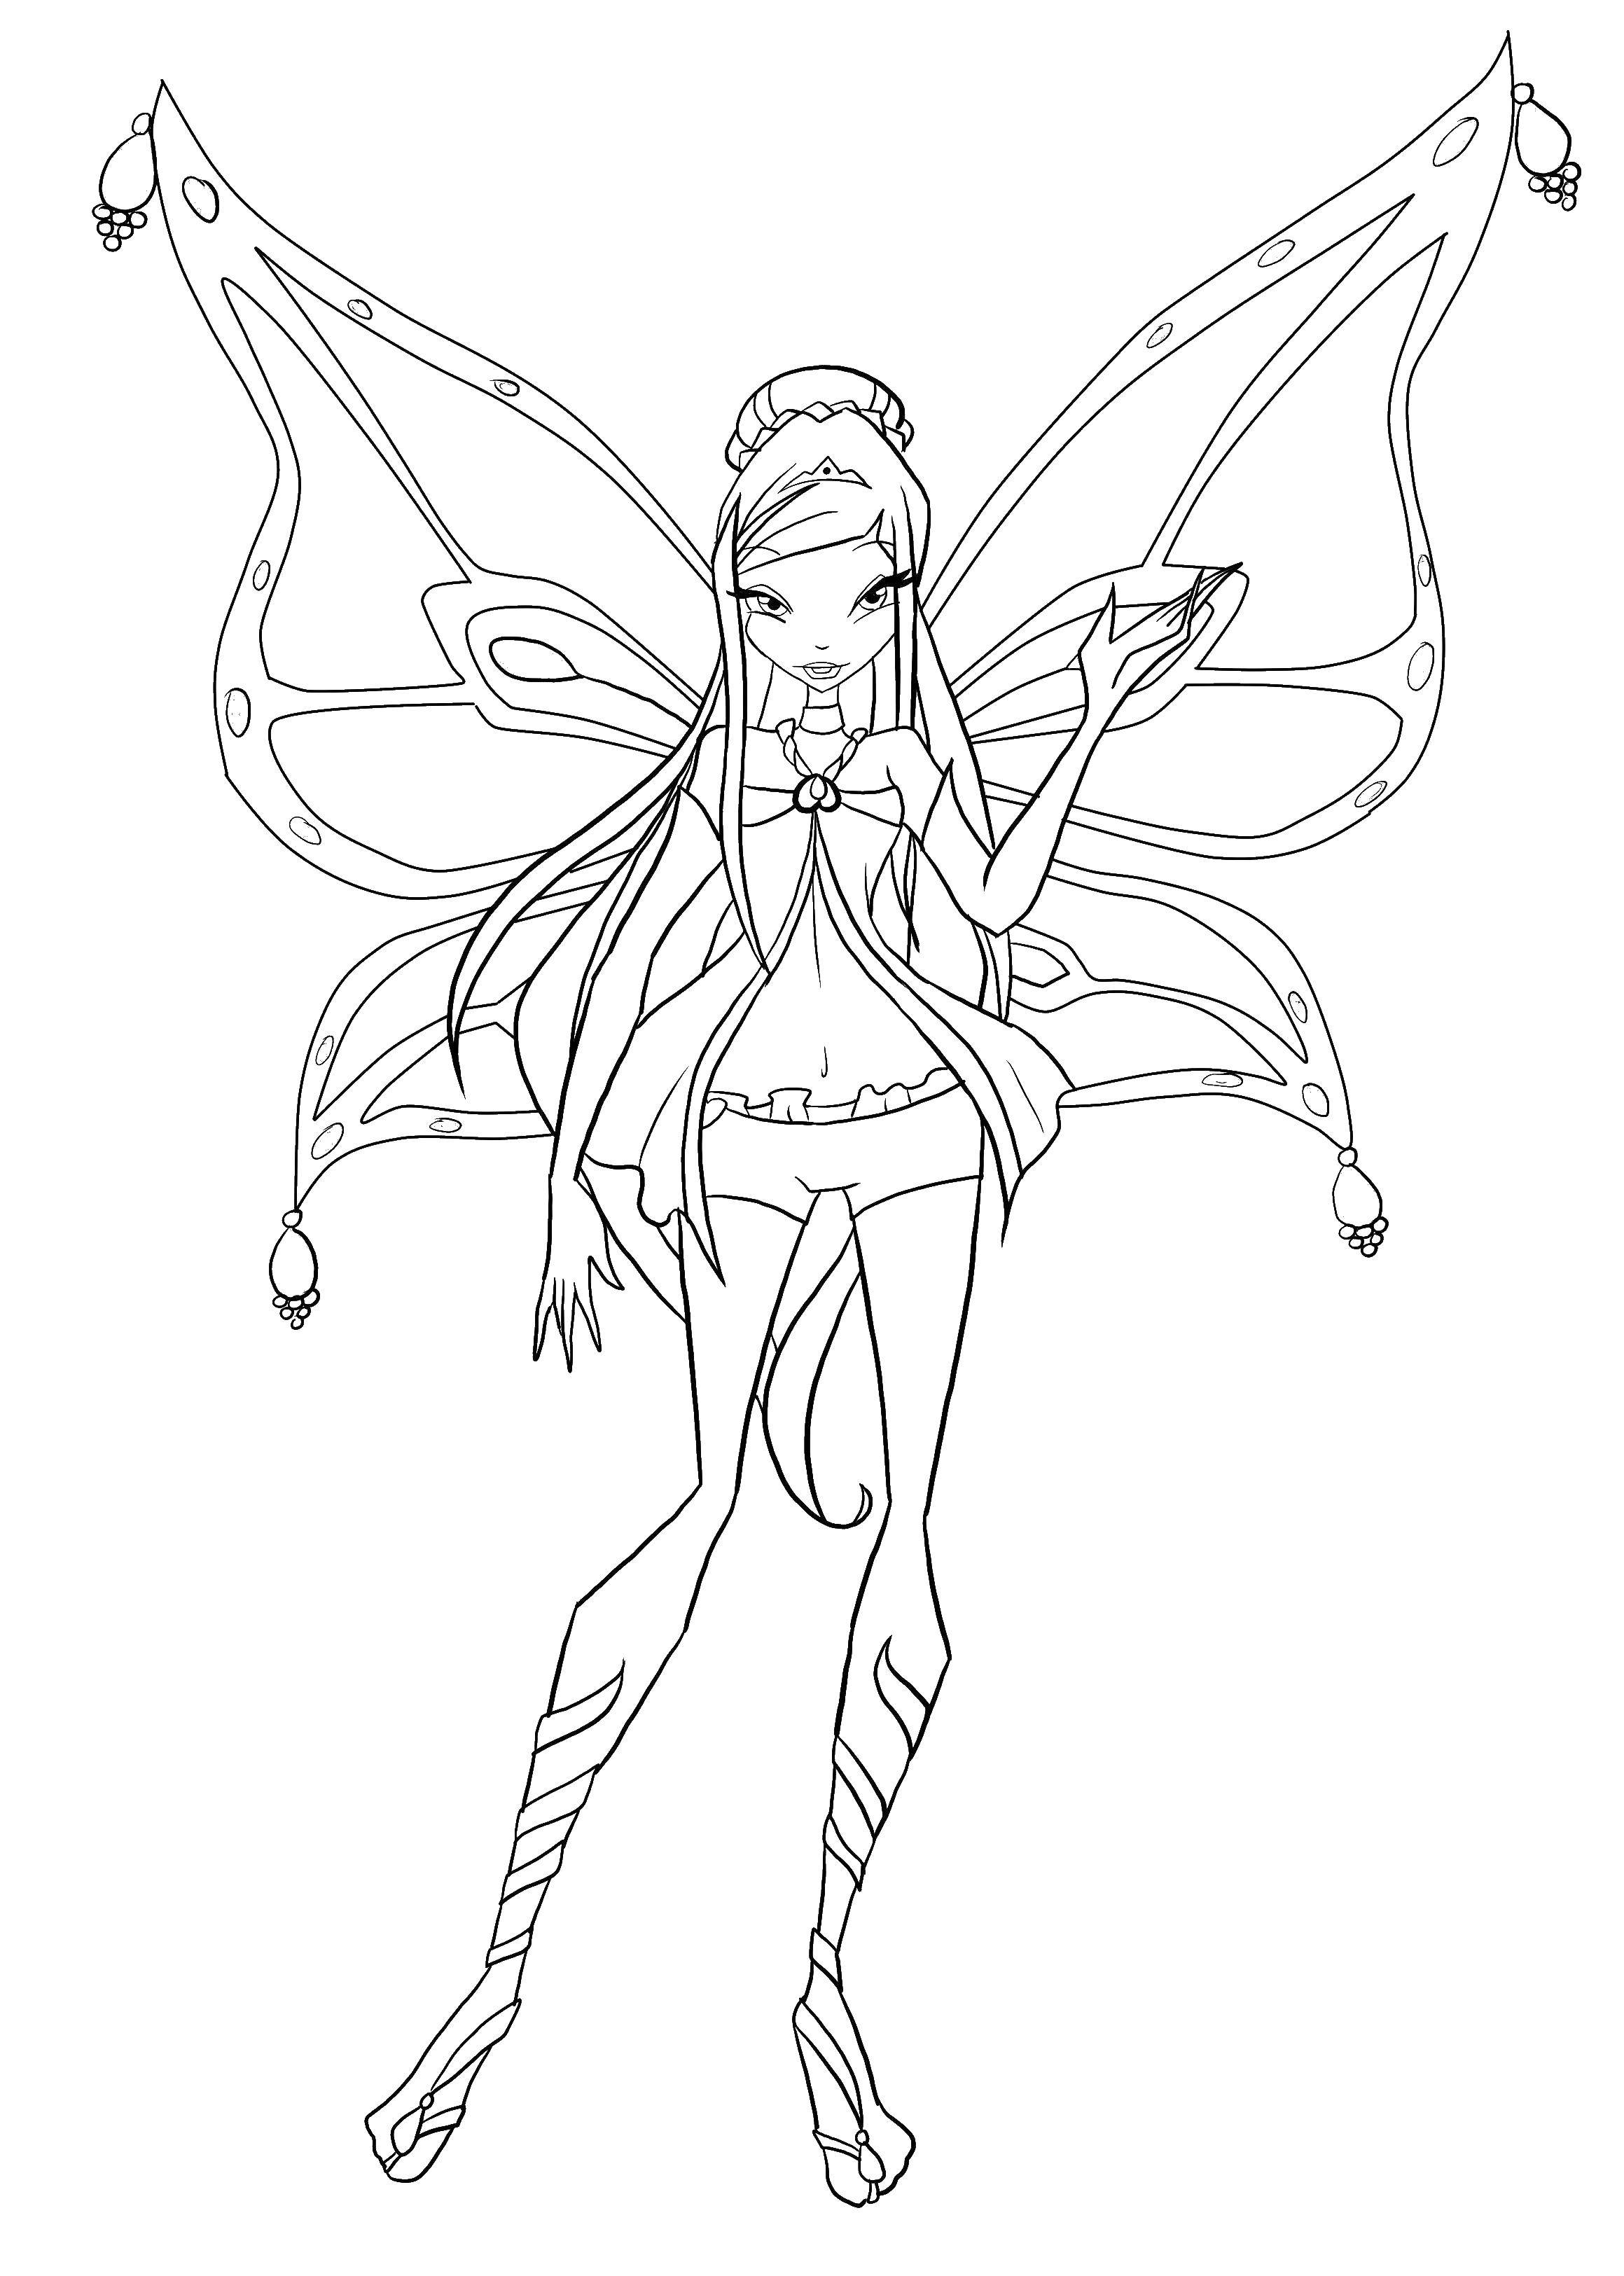 Coloring Stella from Solaris. Category Winx. Tags:  Stella, Winx.